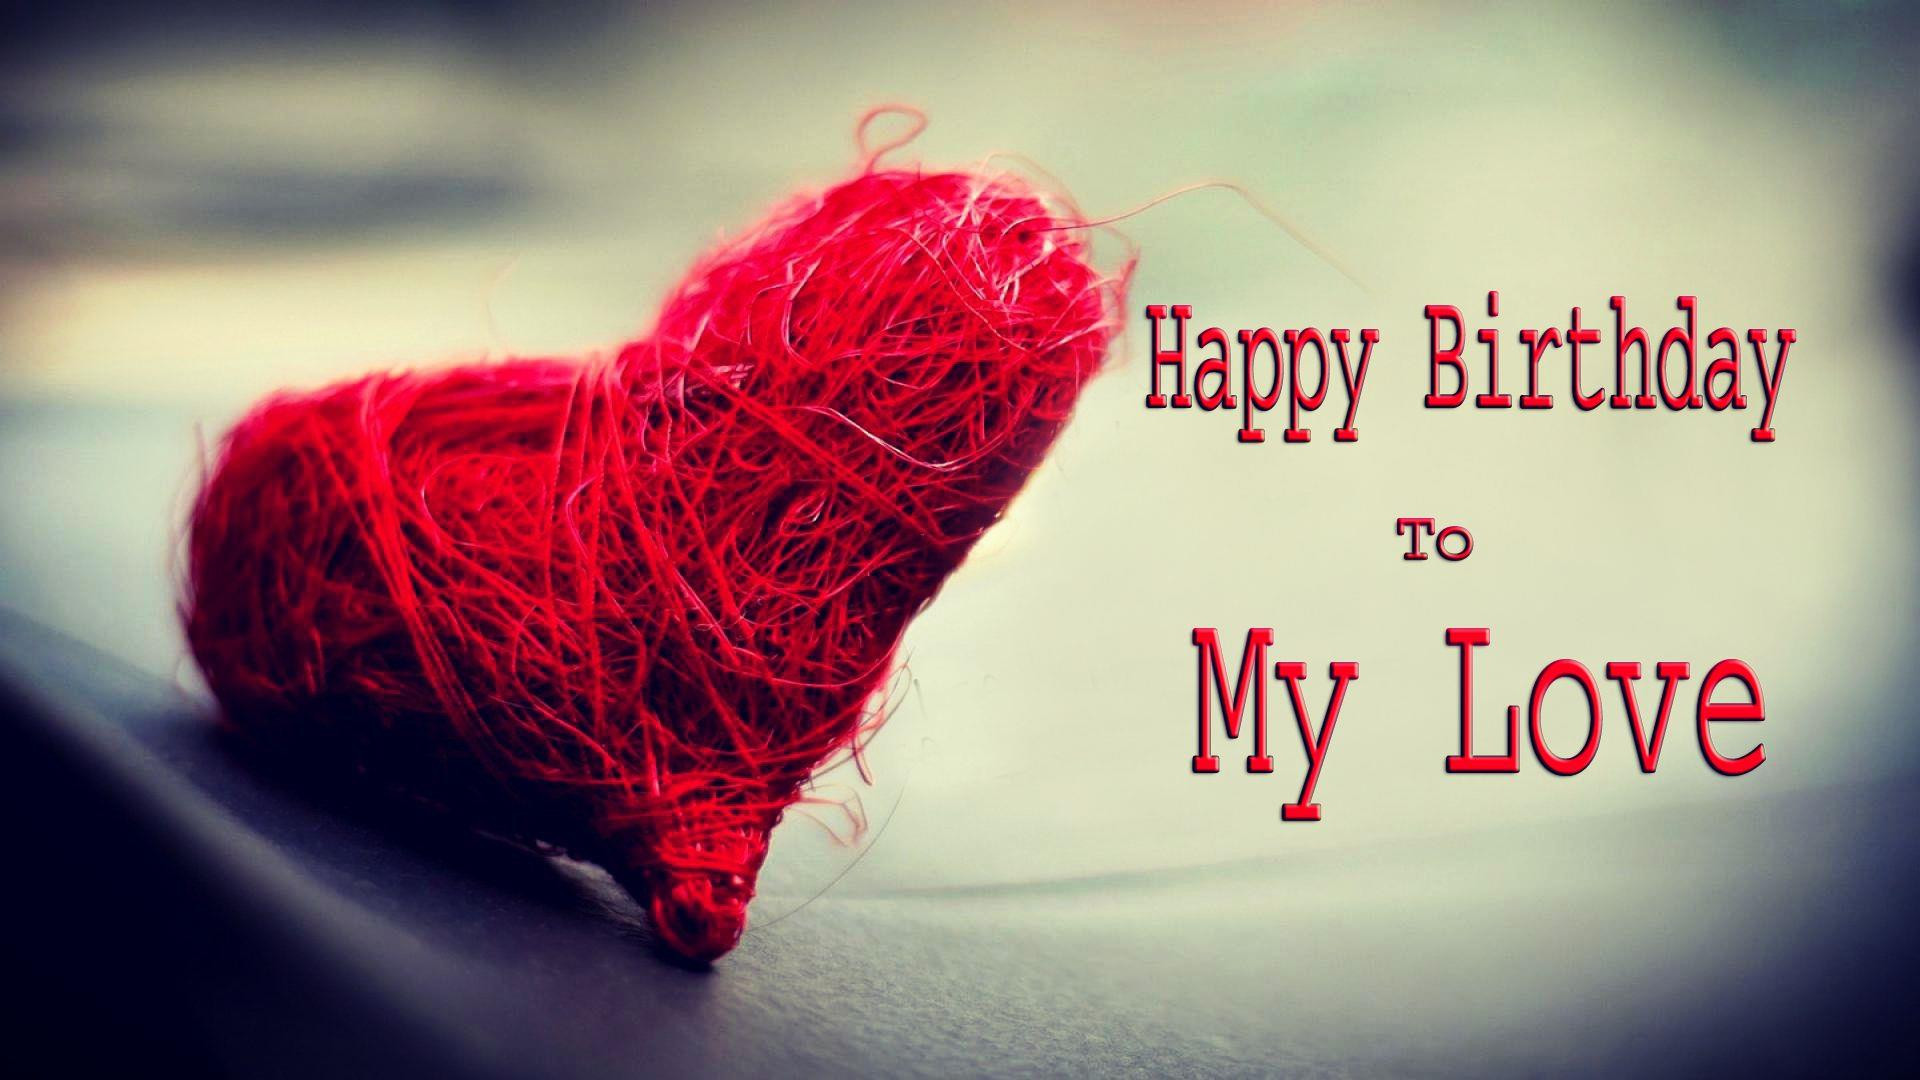 Happy Birthday Wishes To My Love
 Happy Birthday To Love HD Wallpapers Messages & Quotes